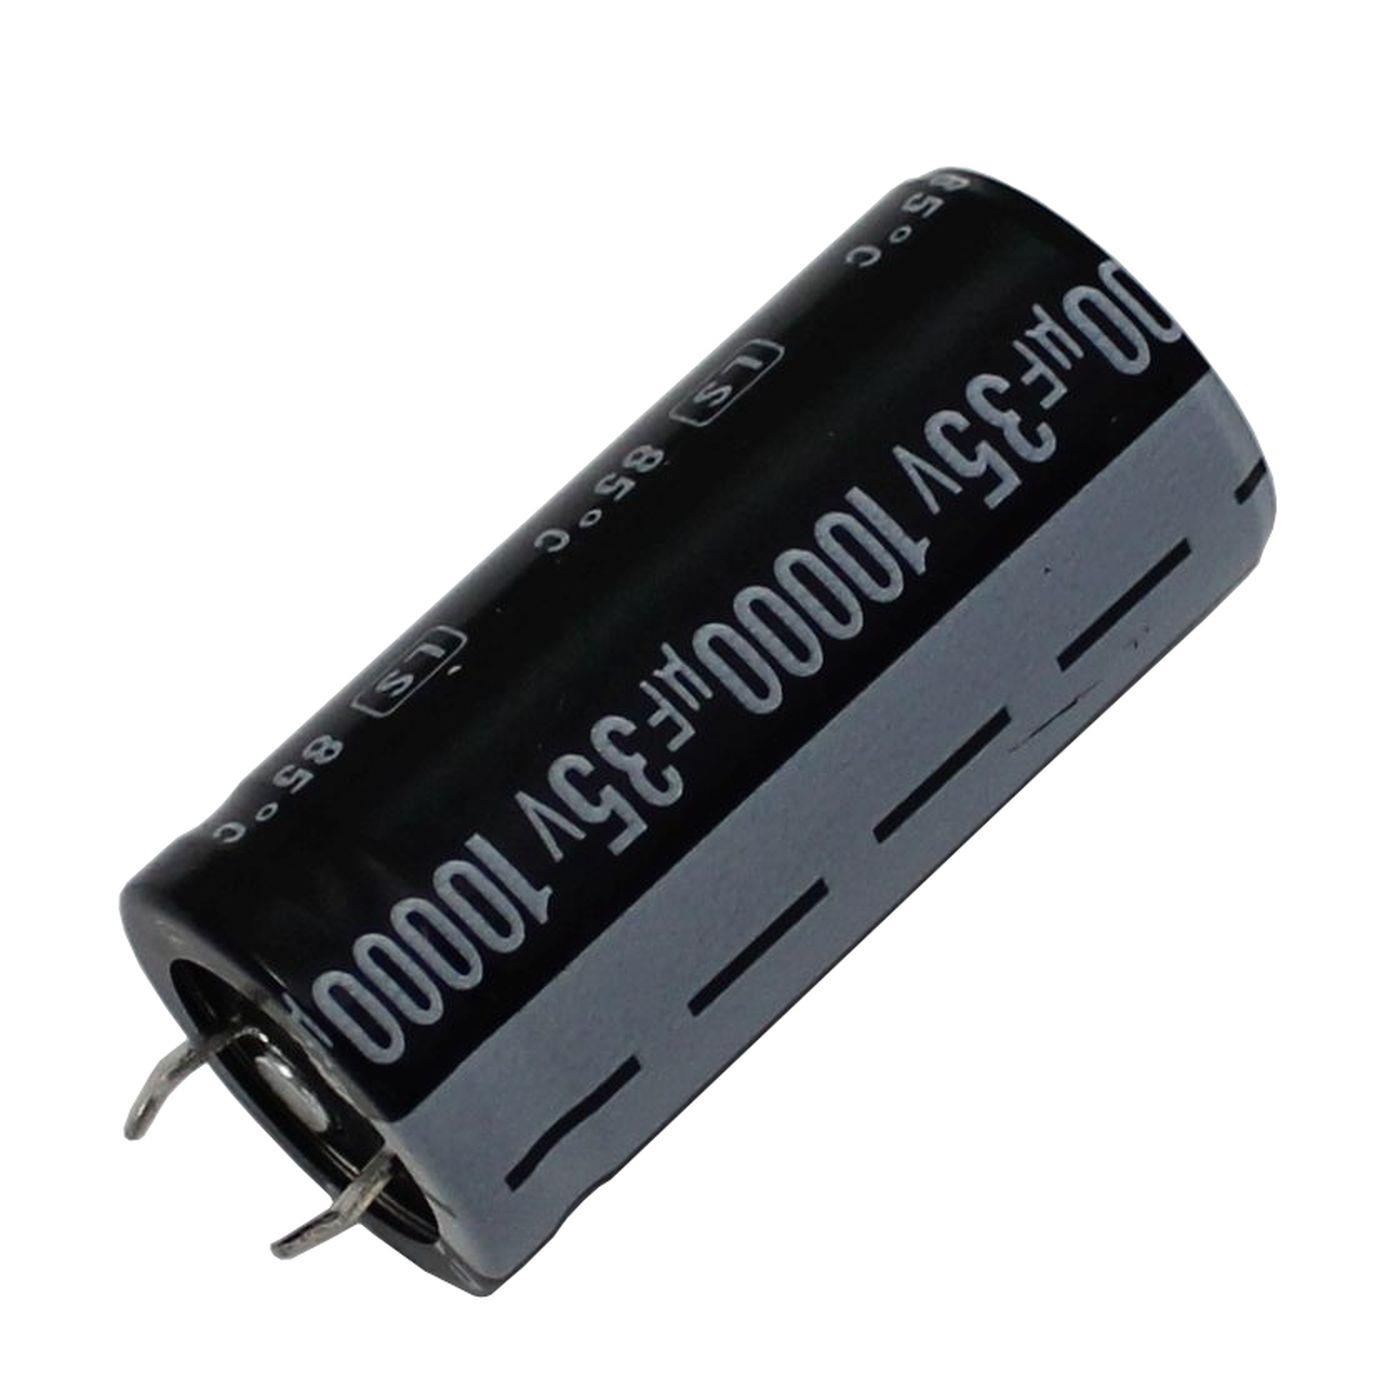 Snap-In Electrolytic capacitor Radial 10000µF 35V 85°C LSW103M1VN45M d22x45mm 10000uF